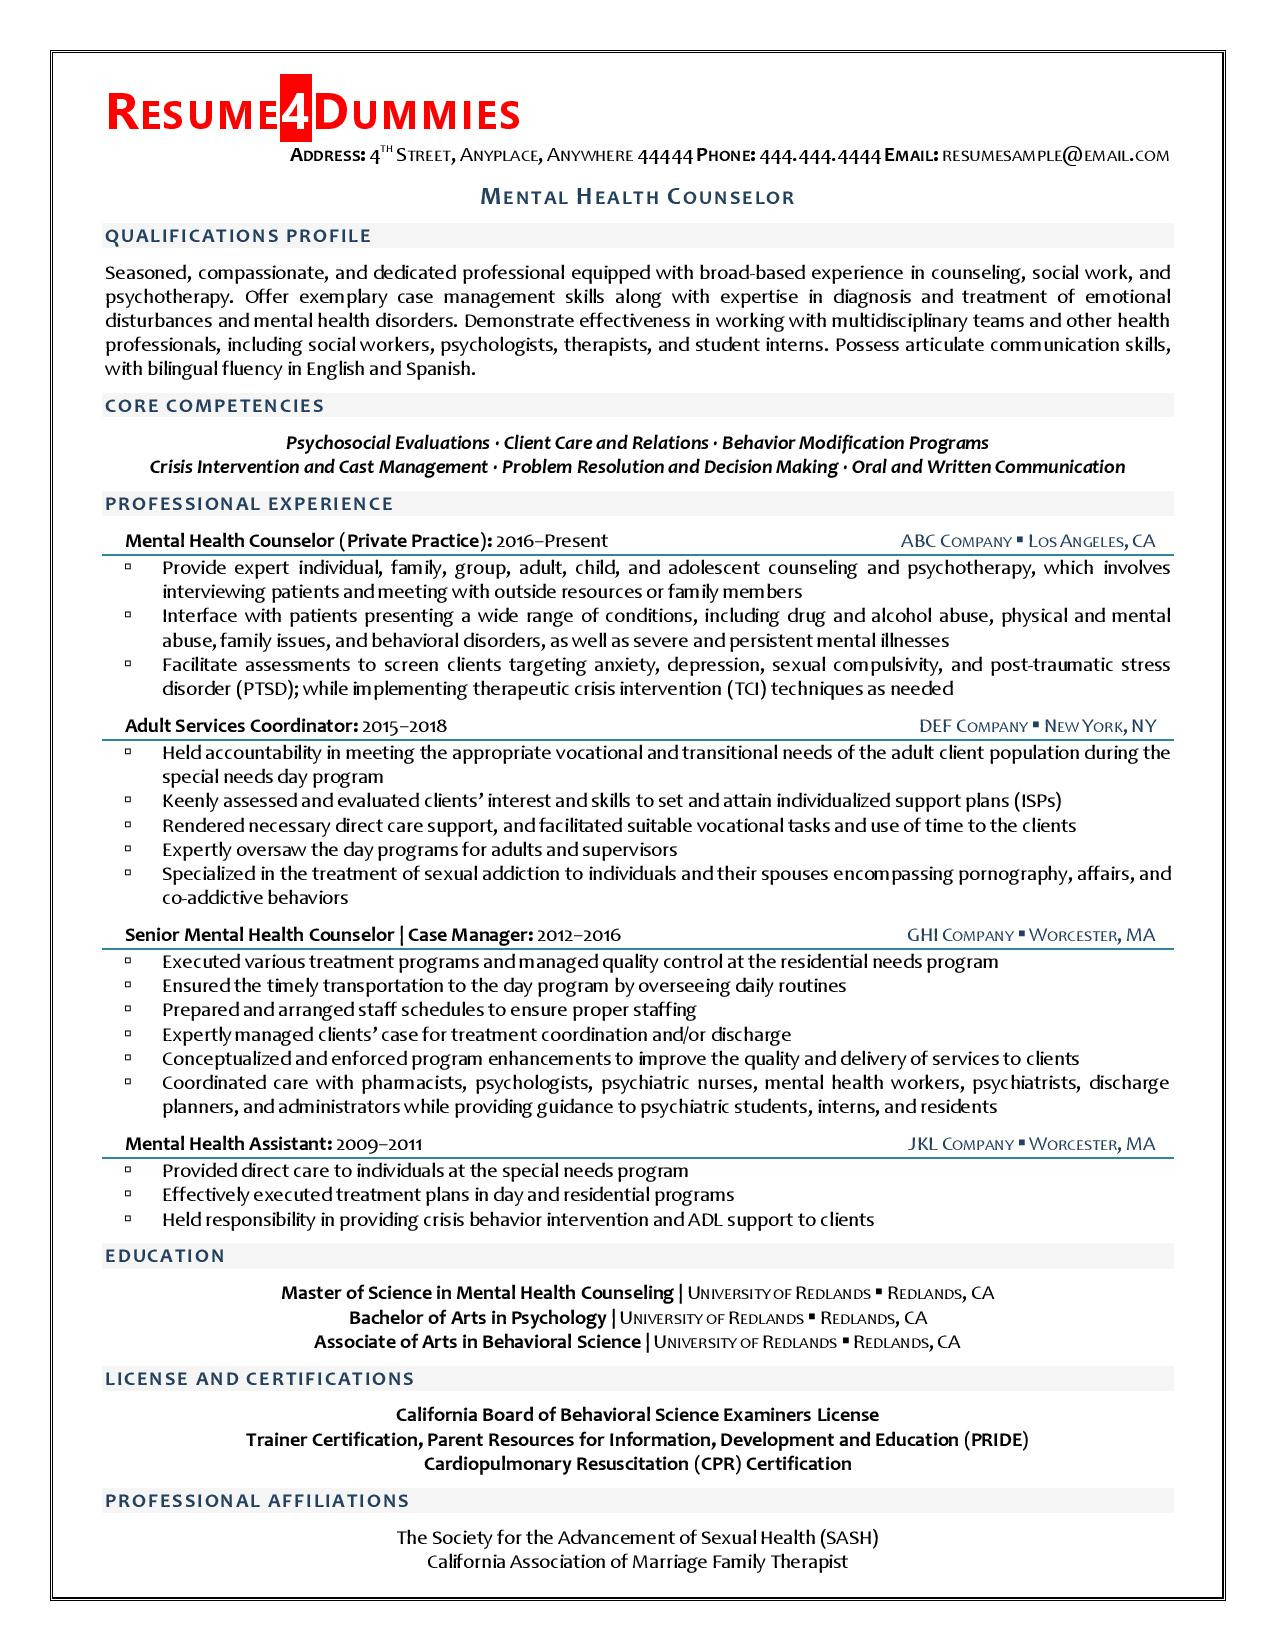 Sample Resume for A Residential Counselor Mental Health Counselor Resume Example Resume4dummies